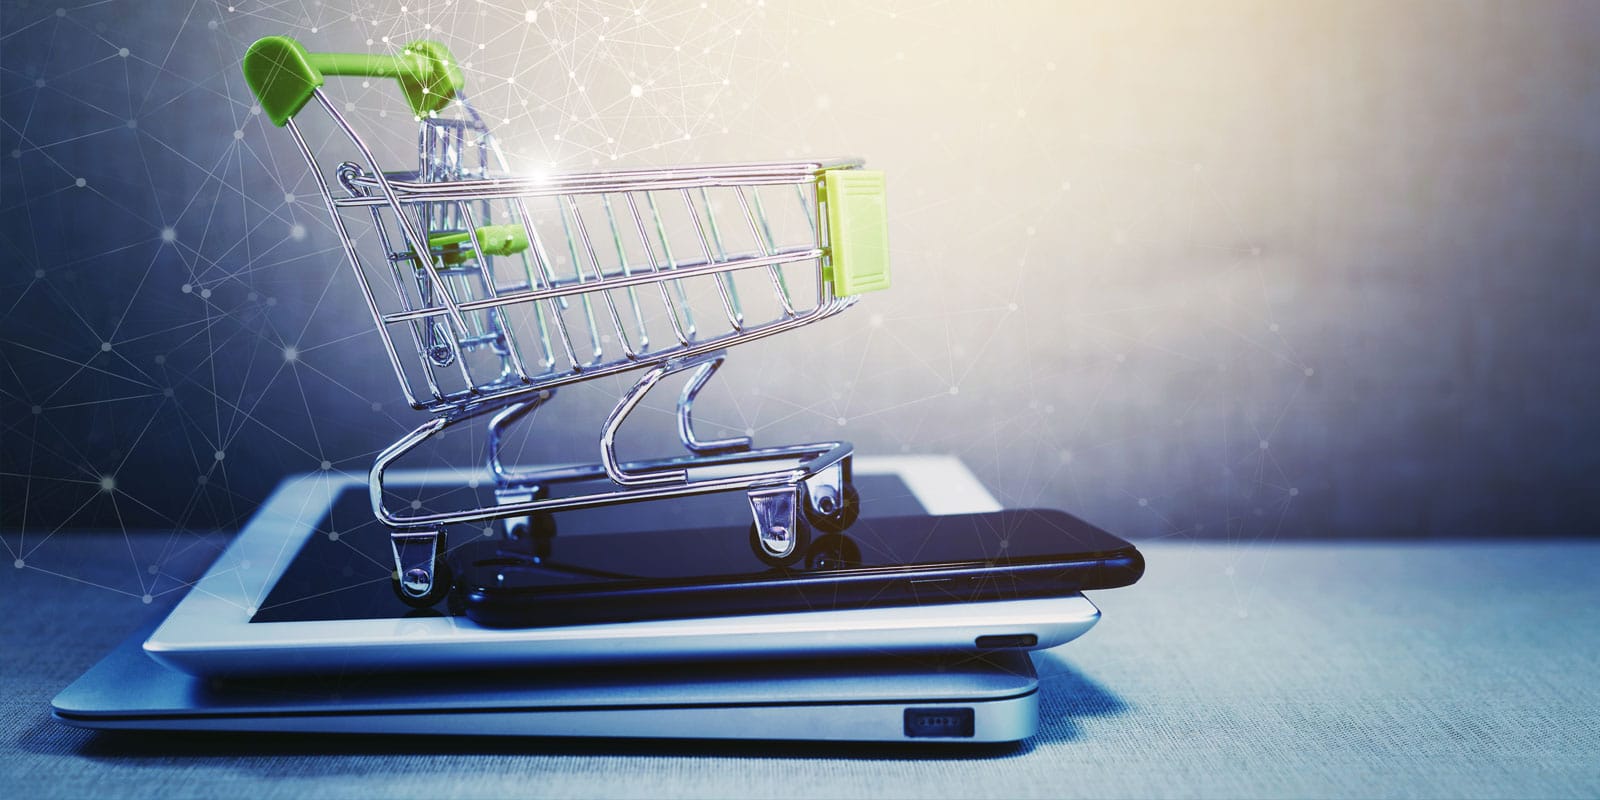 shopping cart on top of digital devices, phone, tablet, laptop